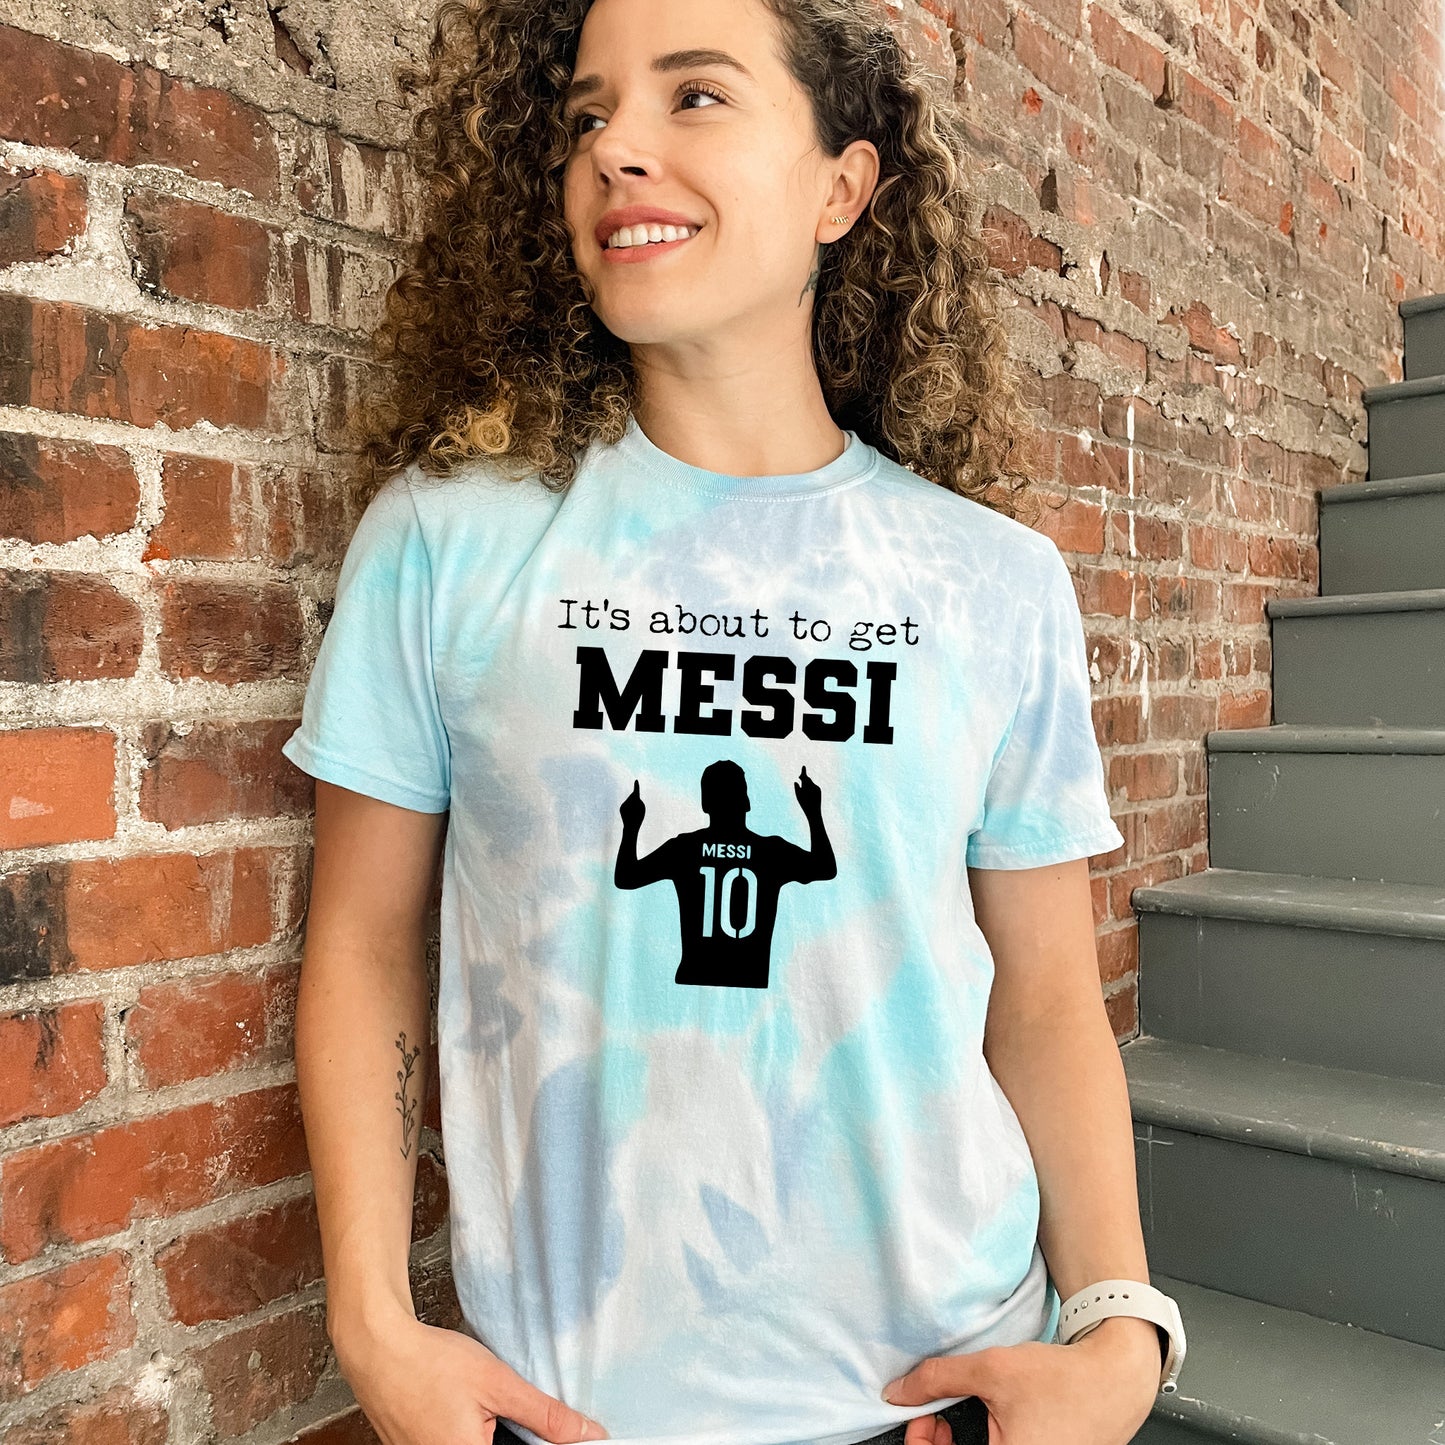 It's About To Get Messi (Soccer) - Mens/Unisex Tie Dye Tee - Blue